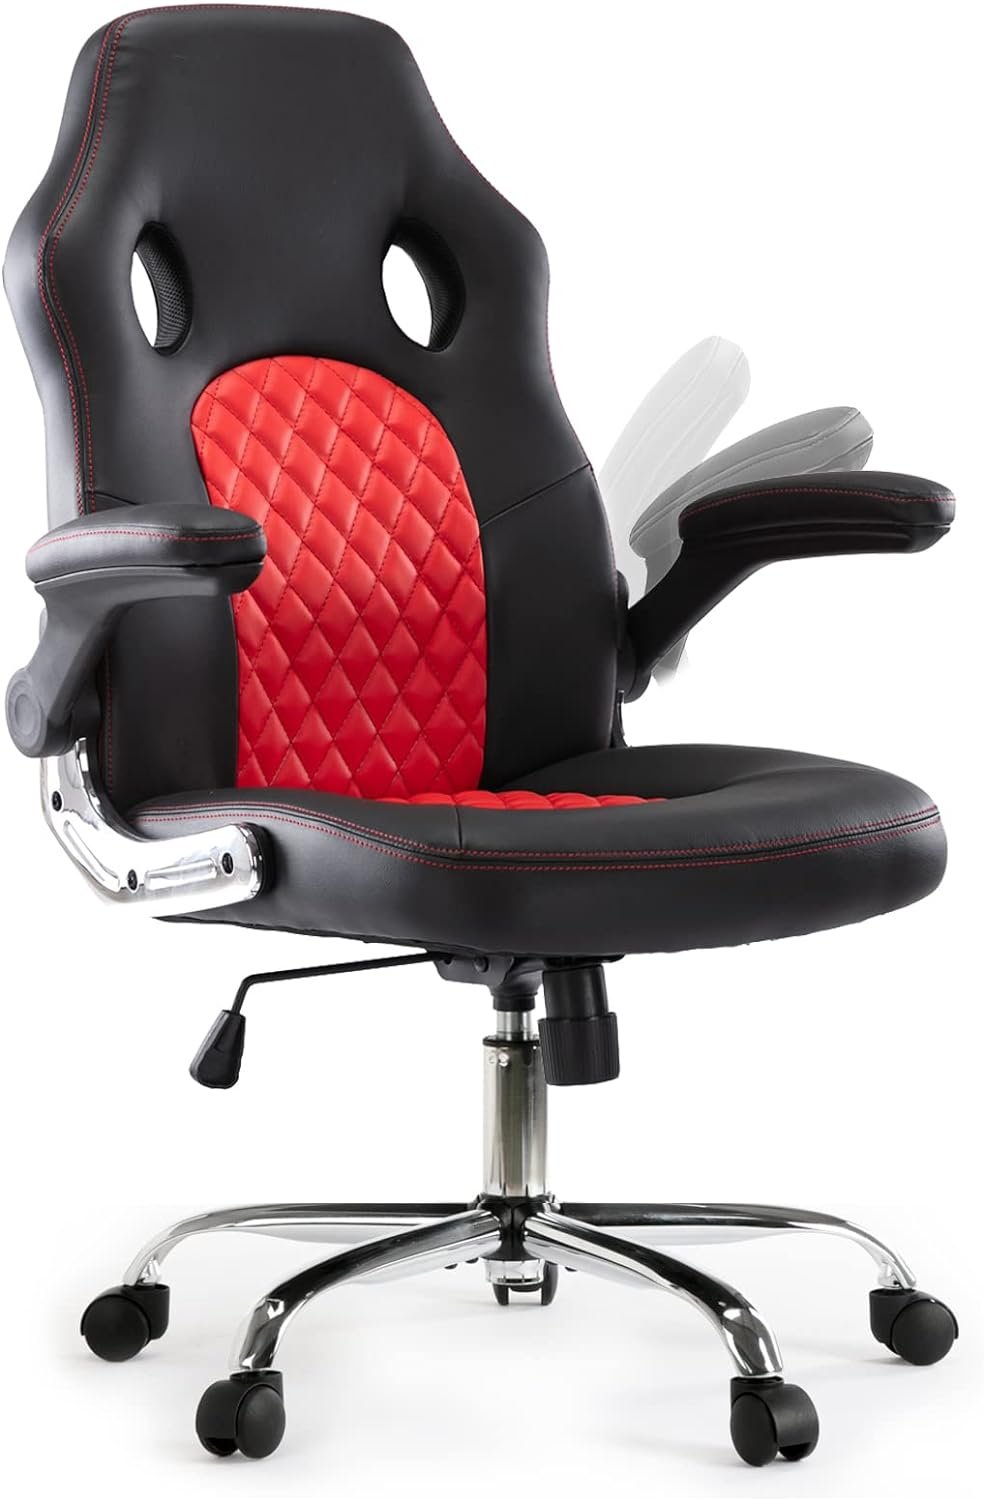 Gaming Office Chair Review